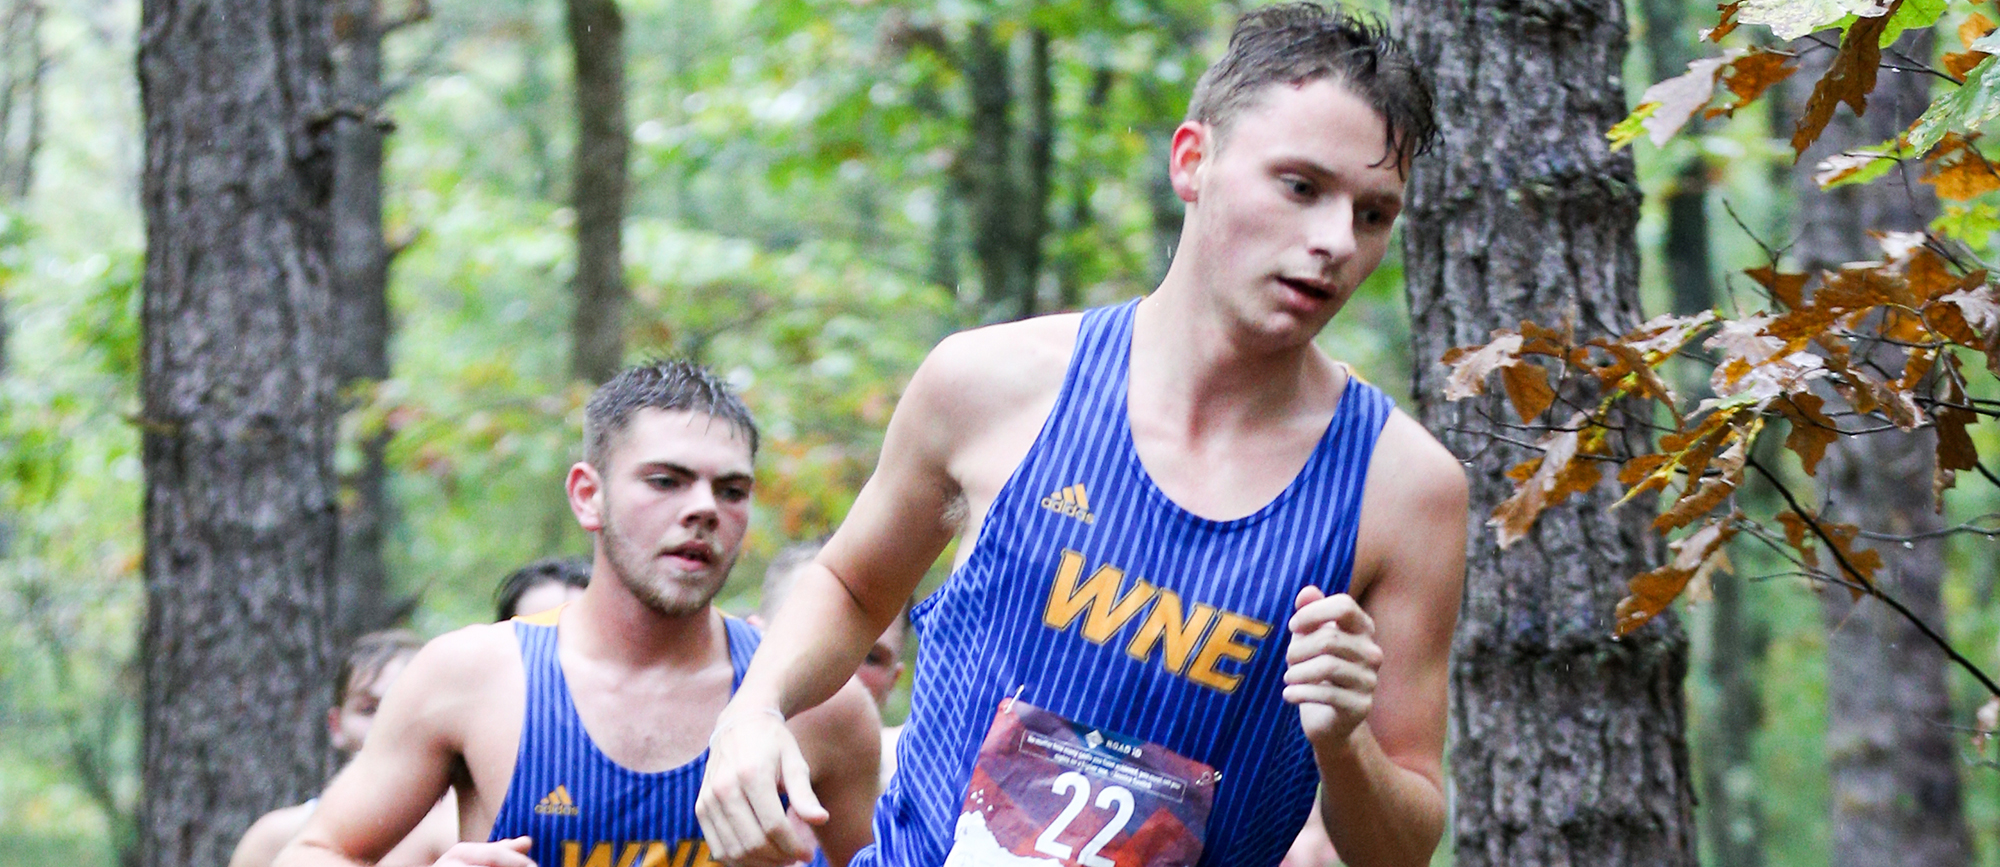 Senior Adam Monroe finished 61st at the Jim Sheehan Memorial Invitational on Saturday. (Photo by Chris Marion)